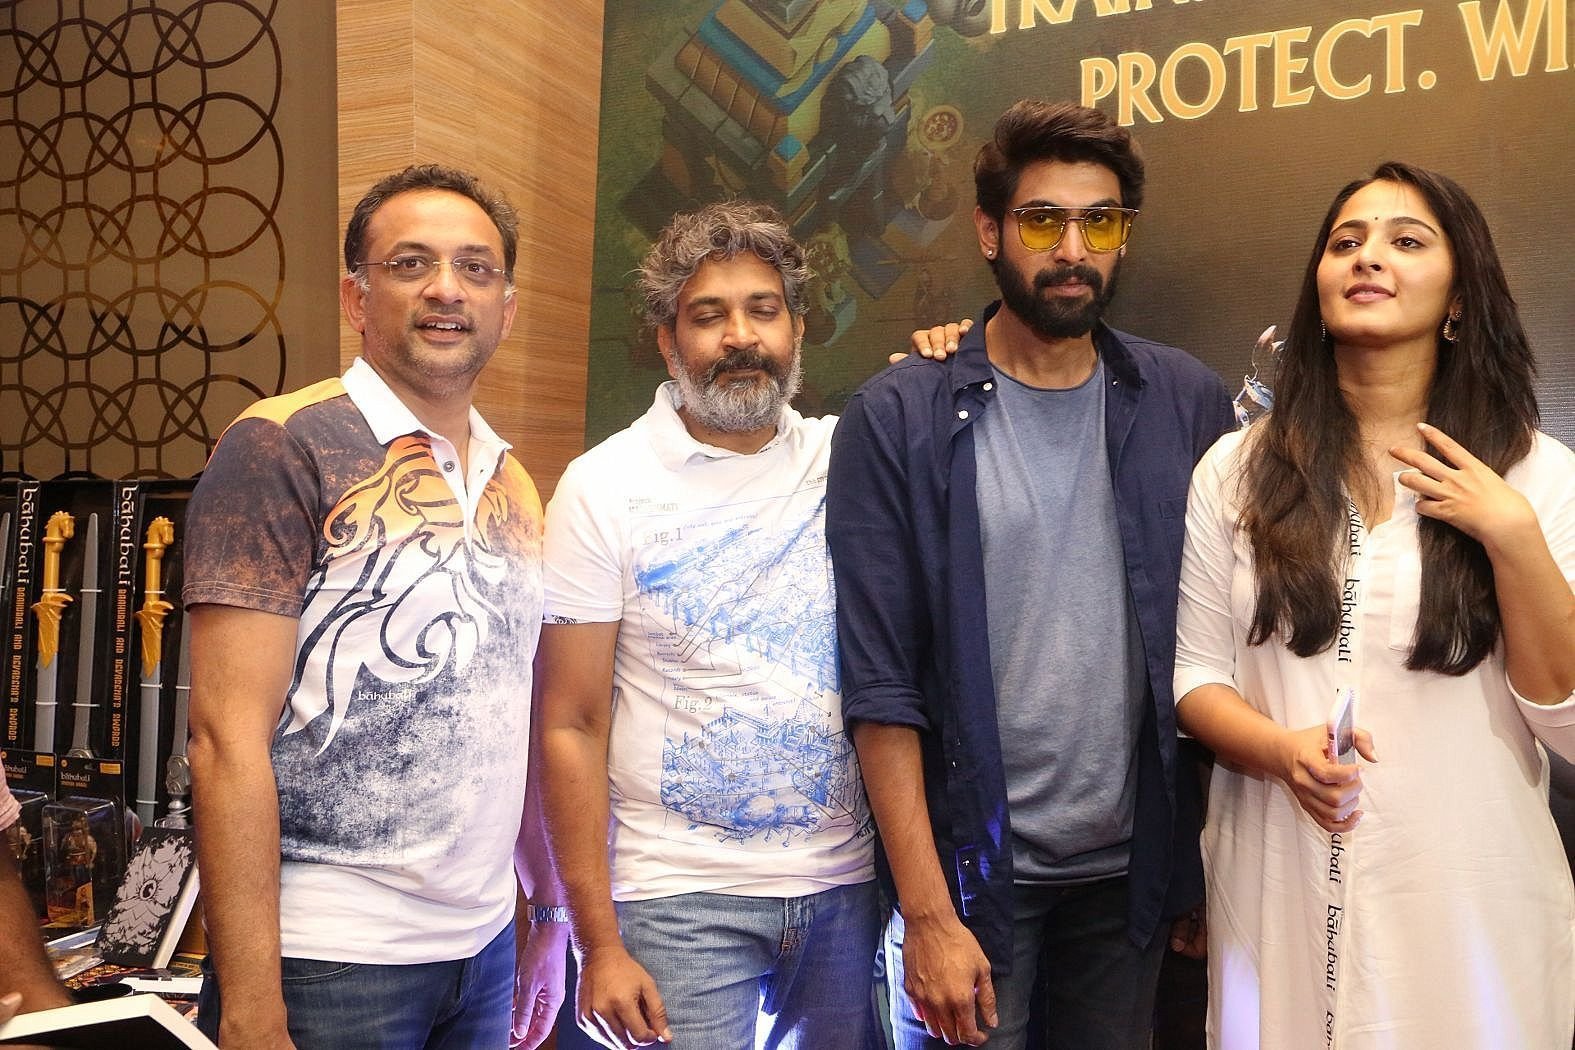 The World of Baahubali Press Meet Photos | Picture 1495155